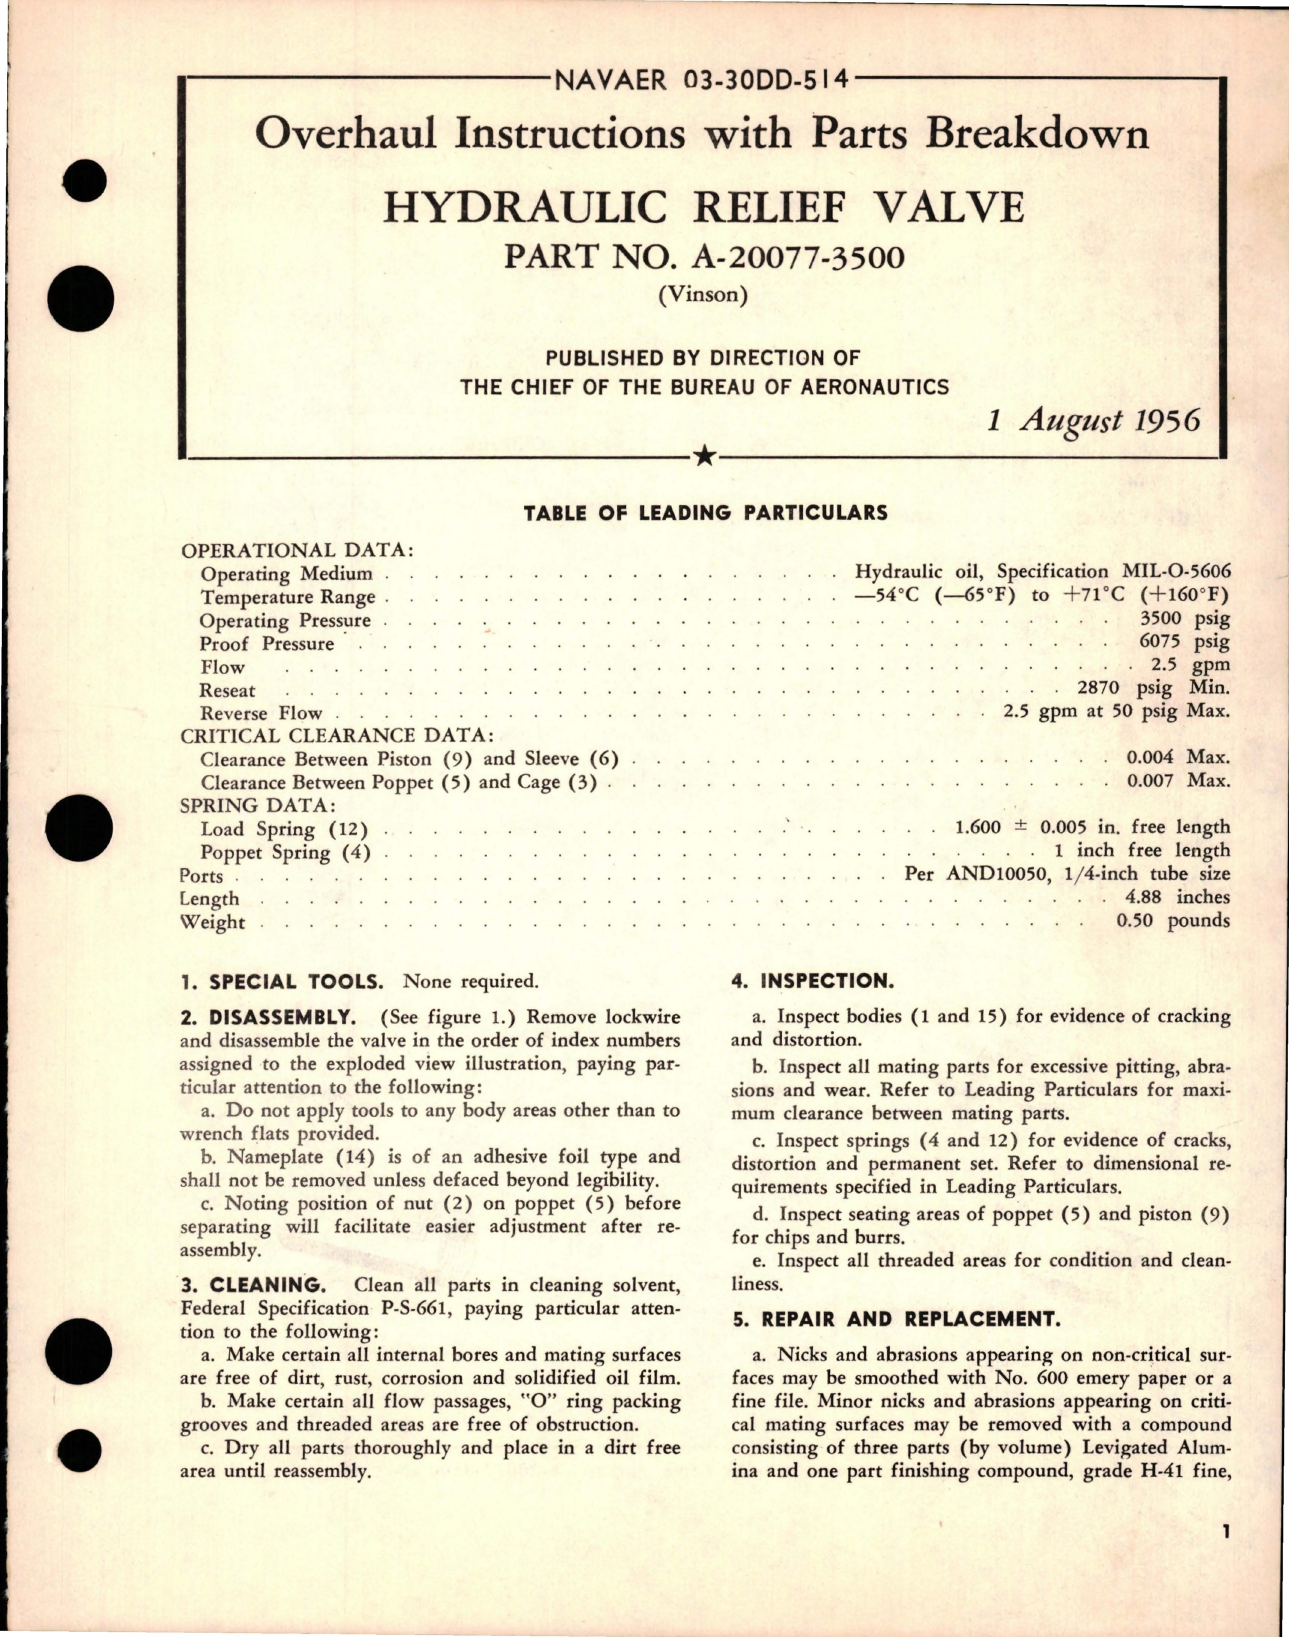 Sample page 1 from AirCorps Library document: Overhaul Instructions with Parts Breakdown for Hydraulic Relief Valve - Part A-20077-3500